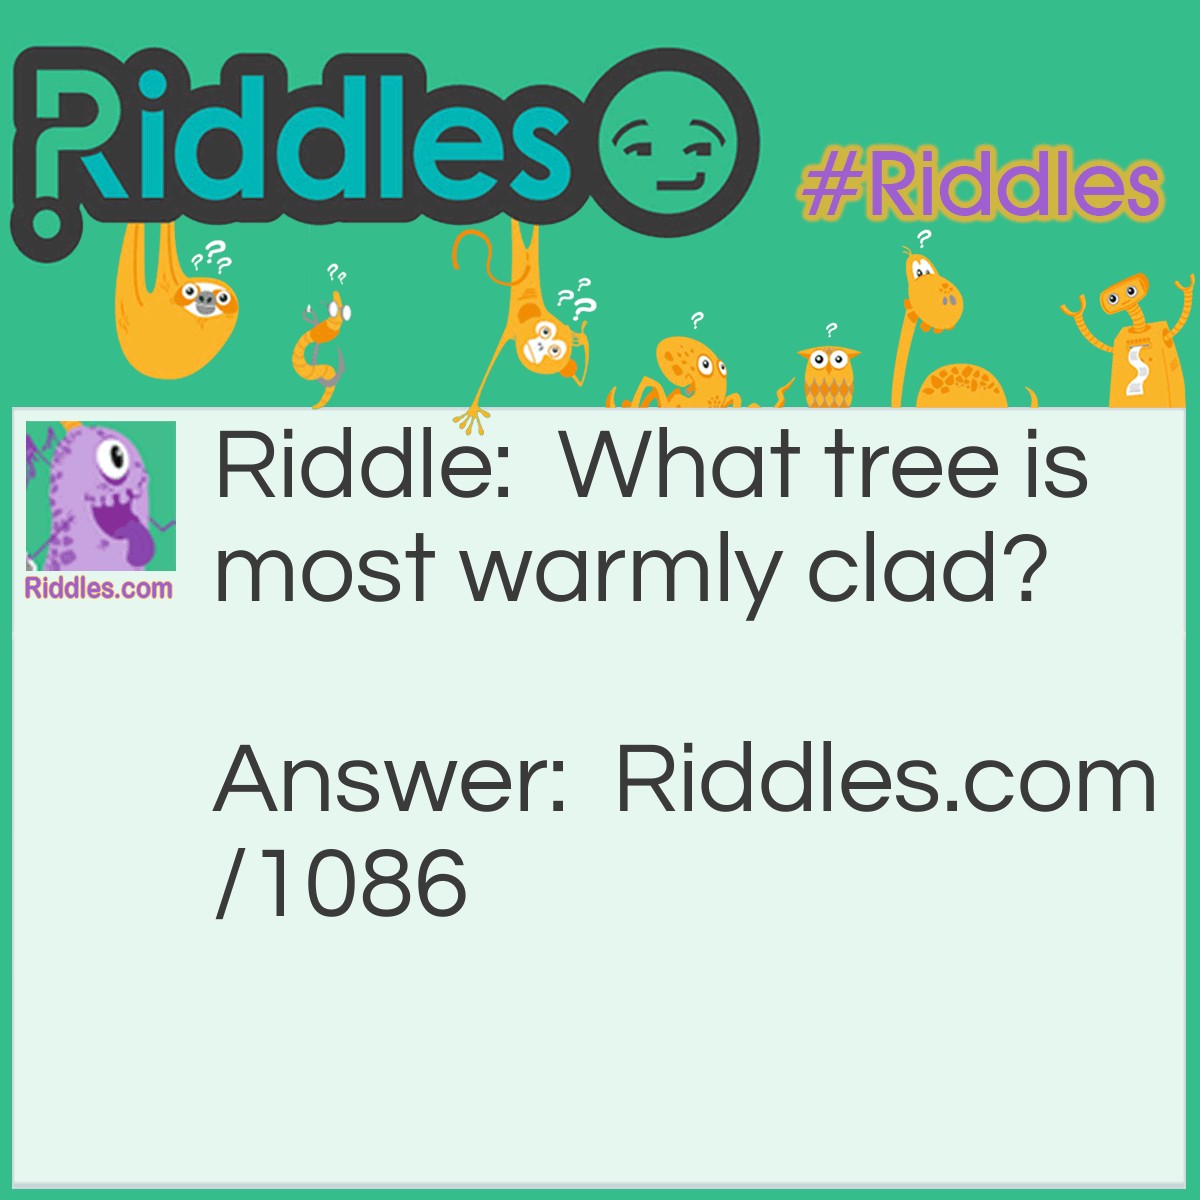 Riddle: What tree is most warmly clad? Answer: A Fir Tree.